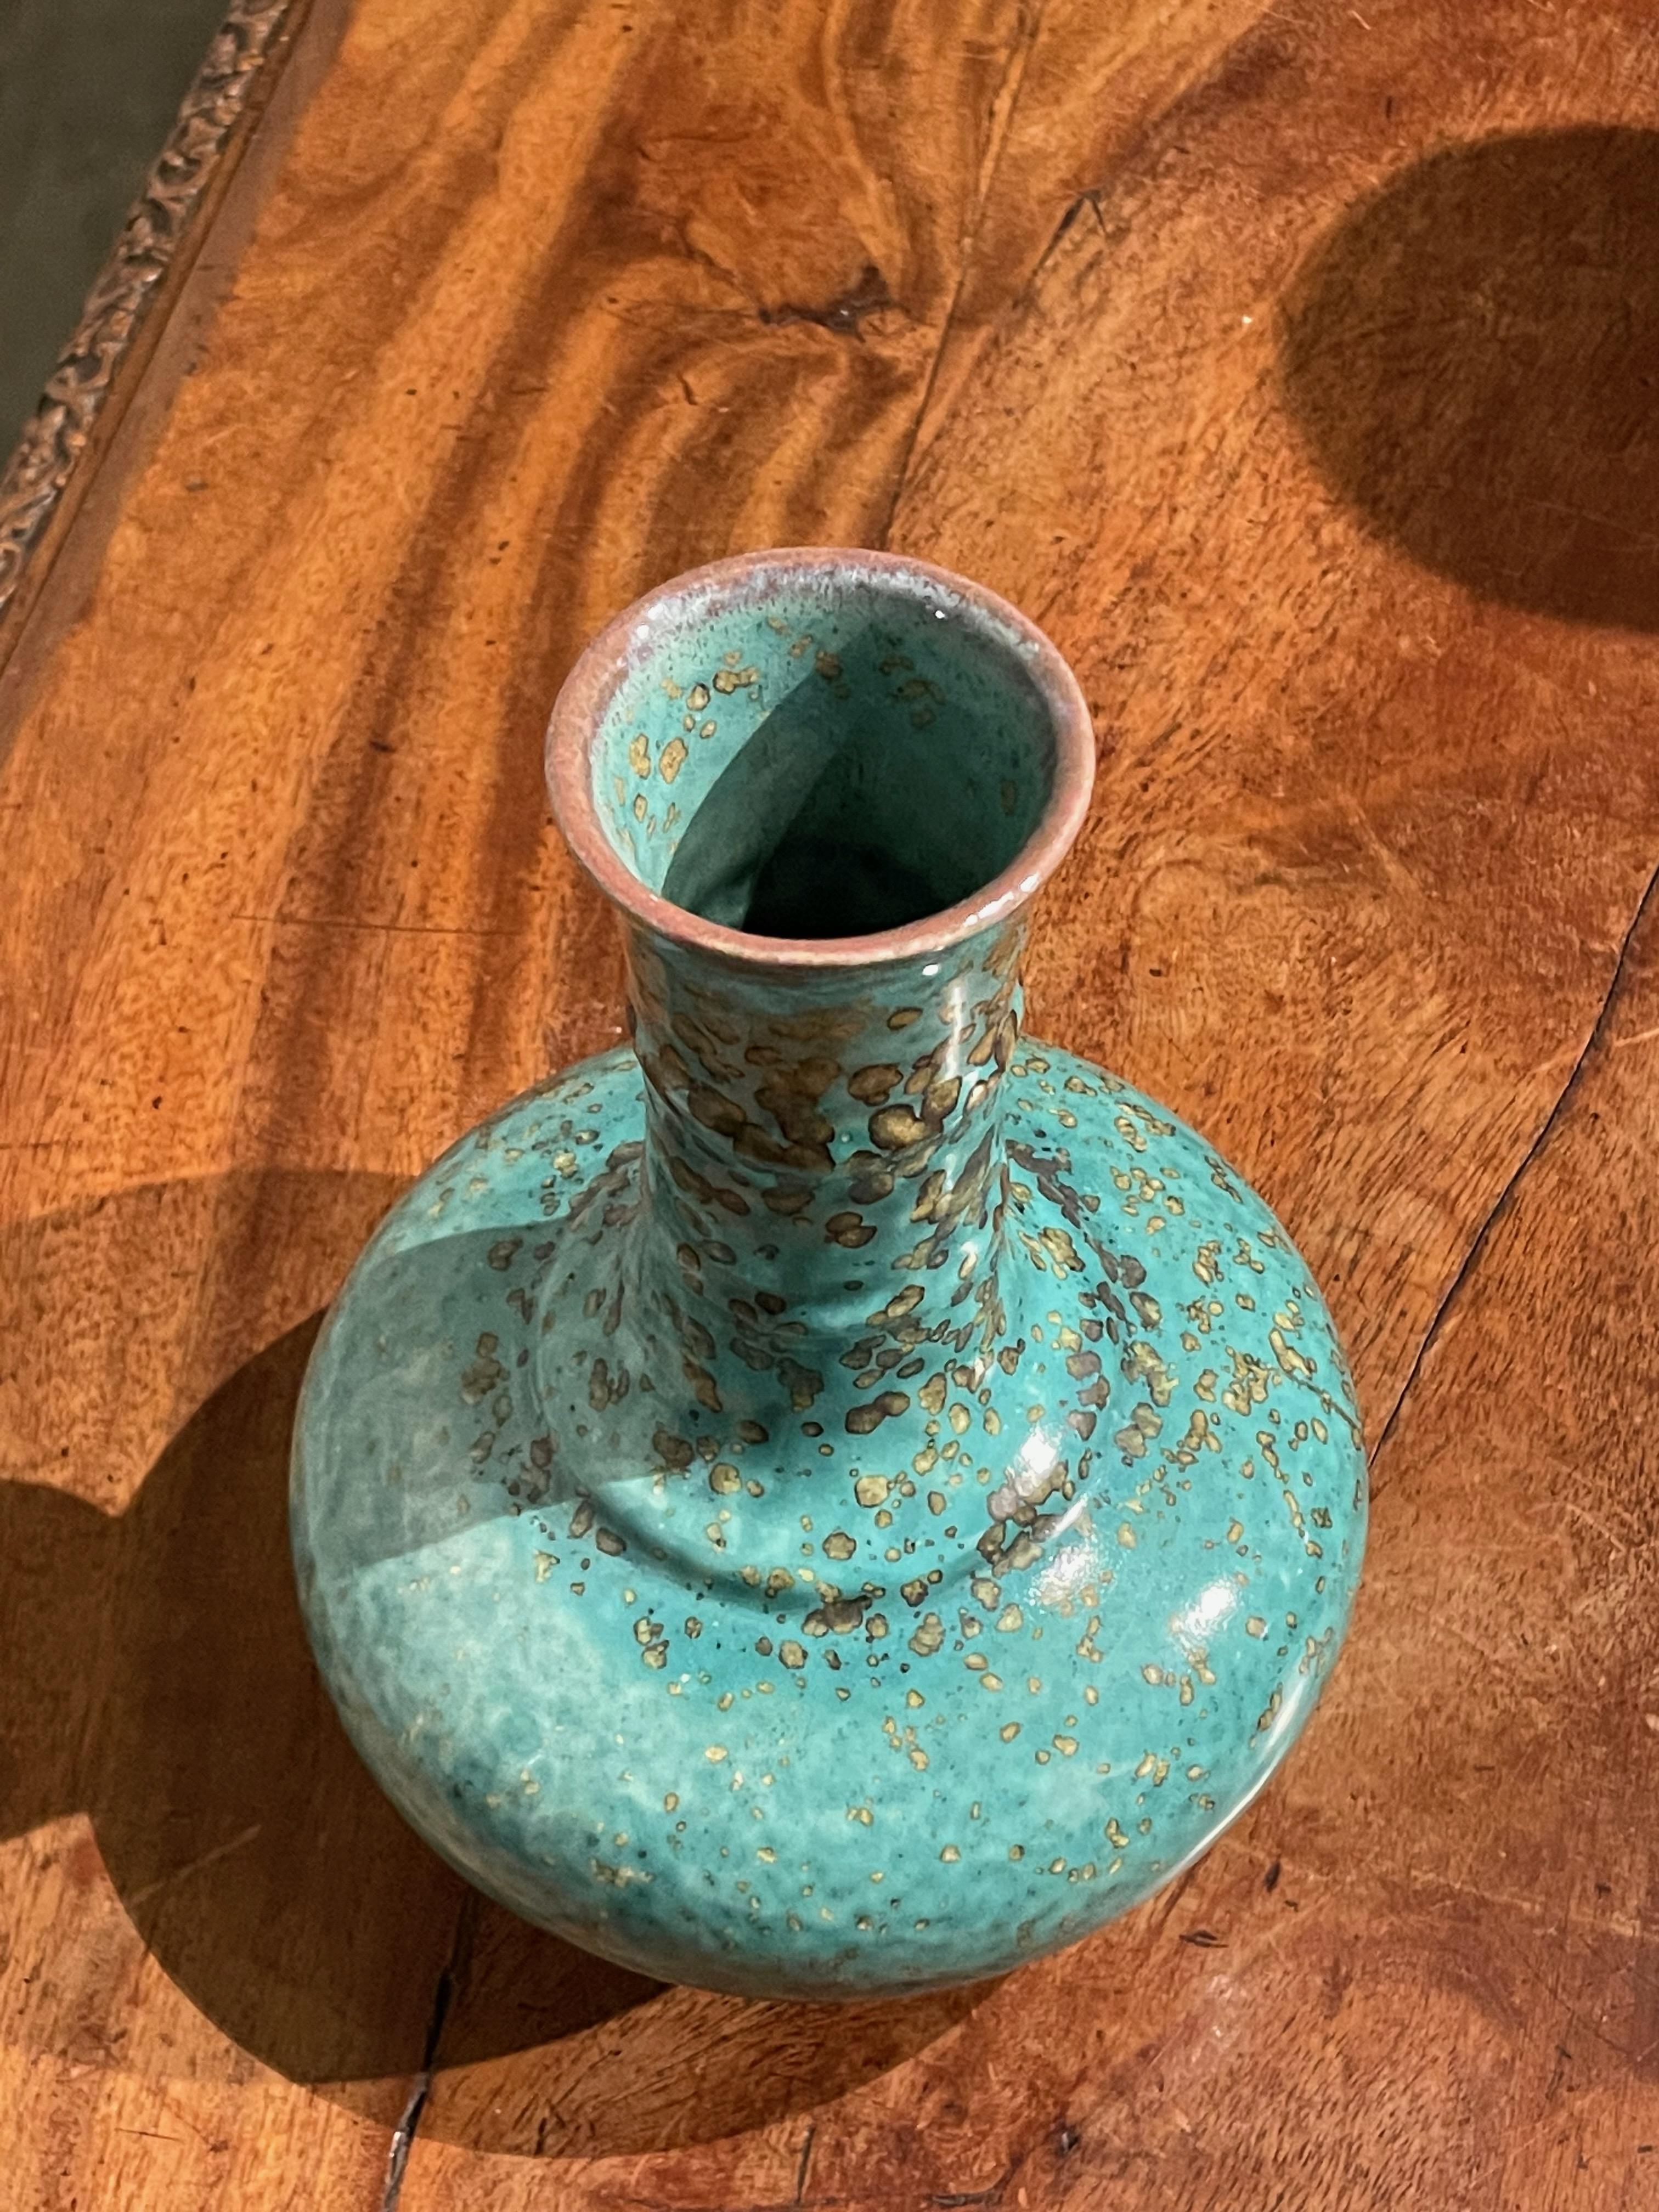 Ceramic Turquoise with Gold Speckled Glaze Tube Neck Vase, China, Contemporary